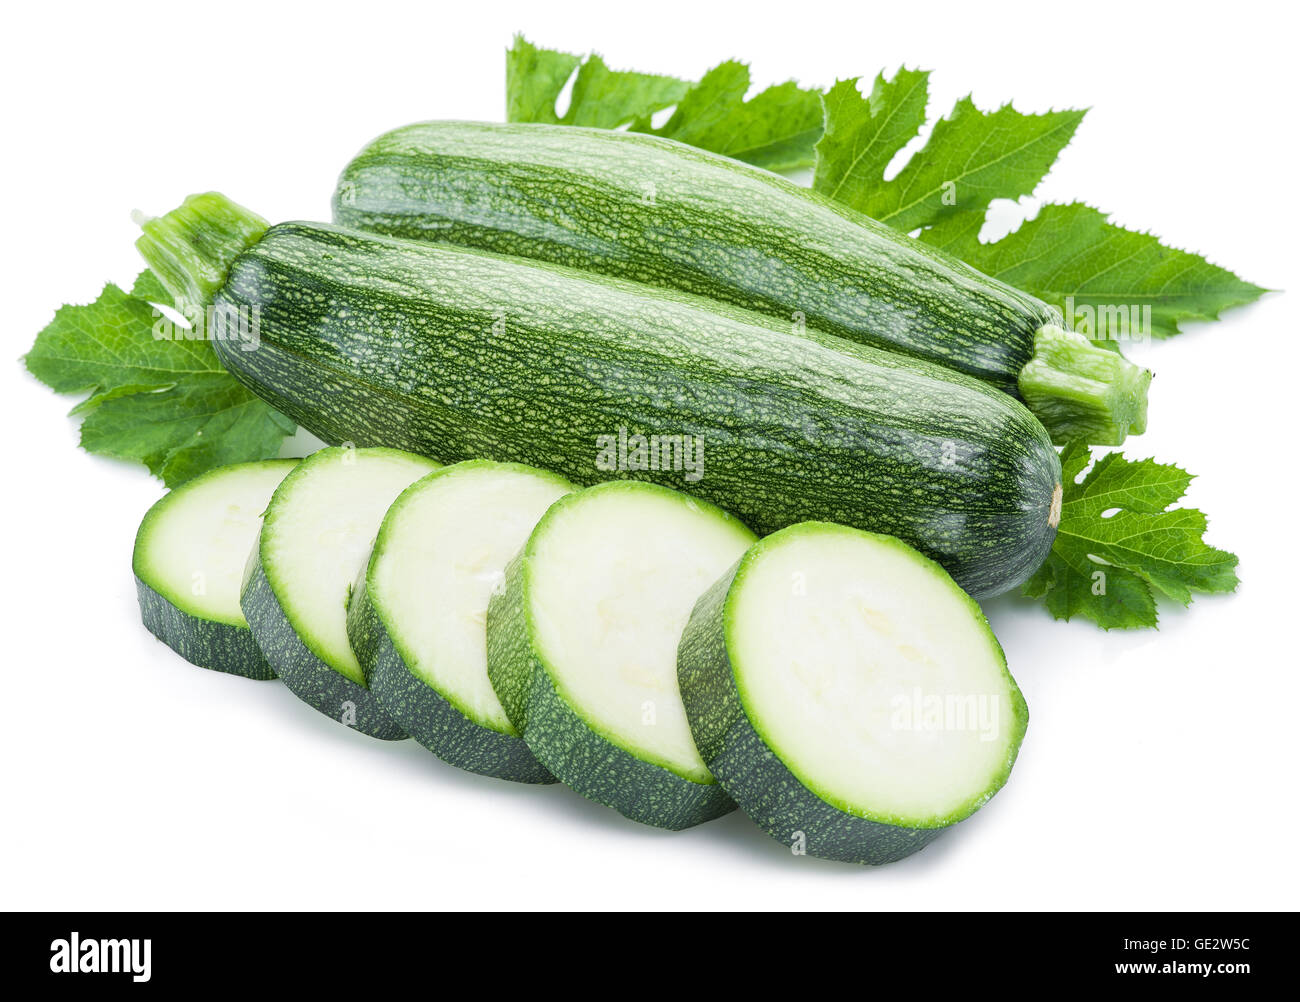 Zucchini with slices on a white background. Stock Photo